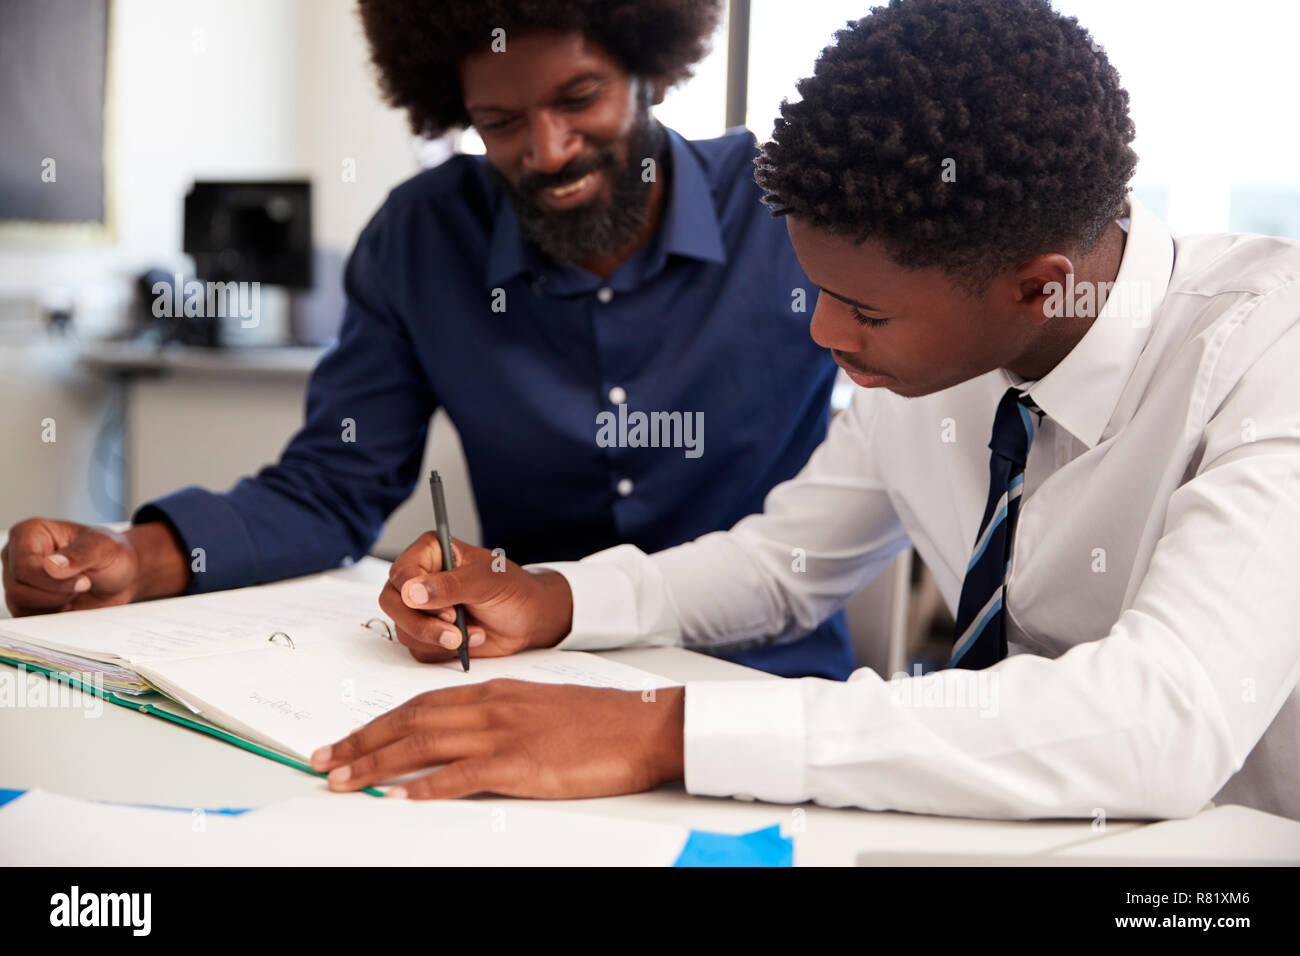 High School Tutor Giving Uniformed Male Student One To One Tuition At Desk In Classroom Stock Photo